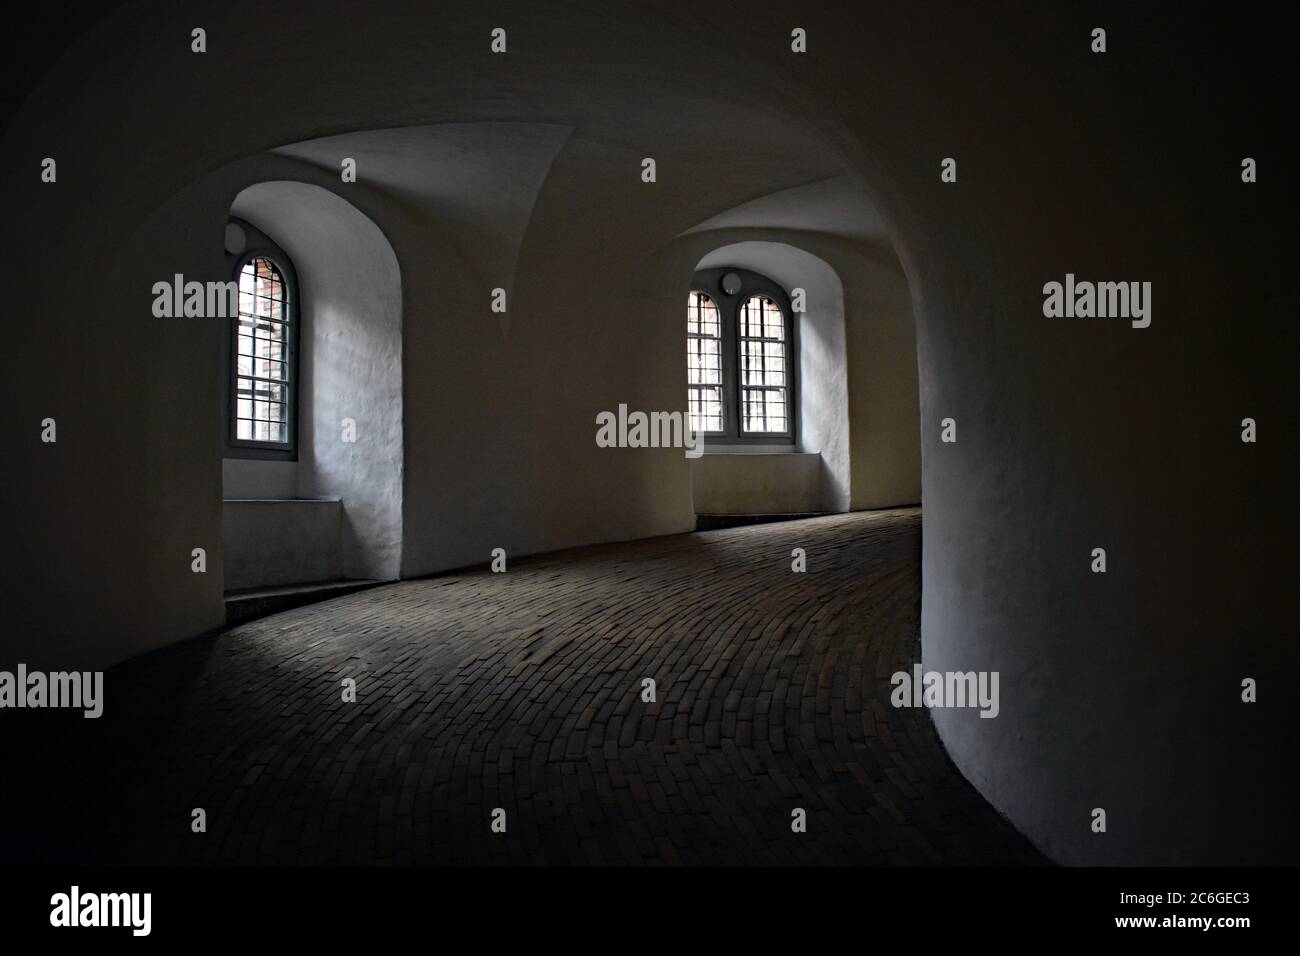 The smooth flat spiral ramp on the inside of the Round Tower in Copenhagen.  An equestrian staircase so horses could ascend.  Two windows let light in. Stock Photo